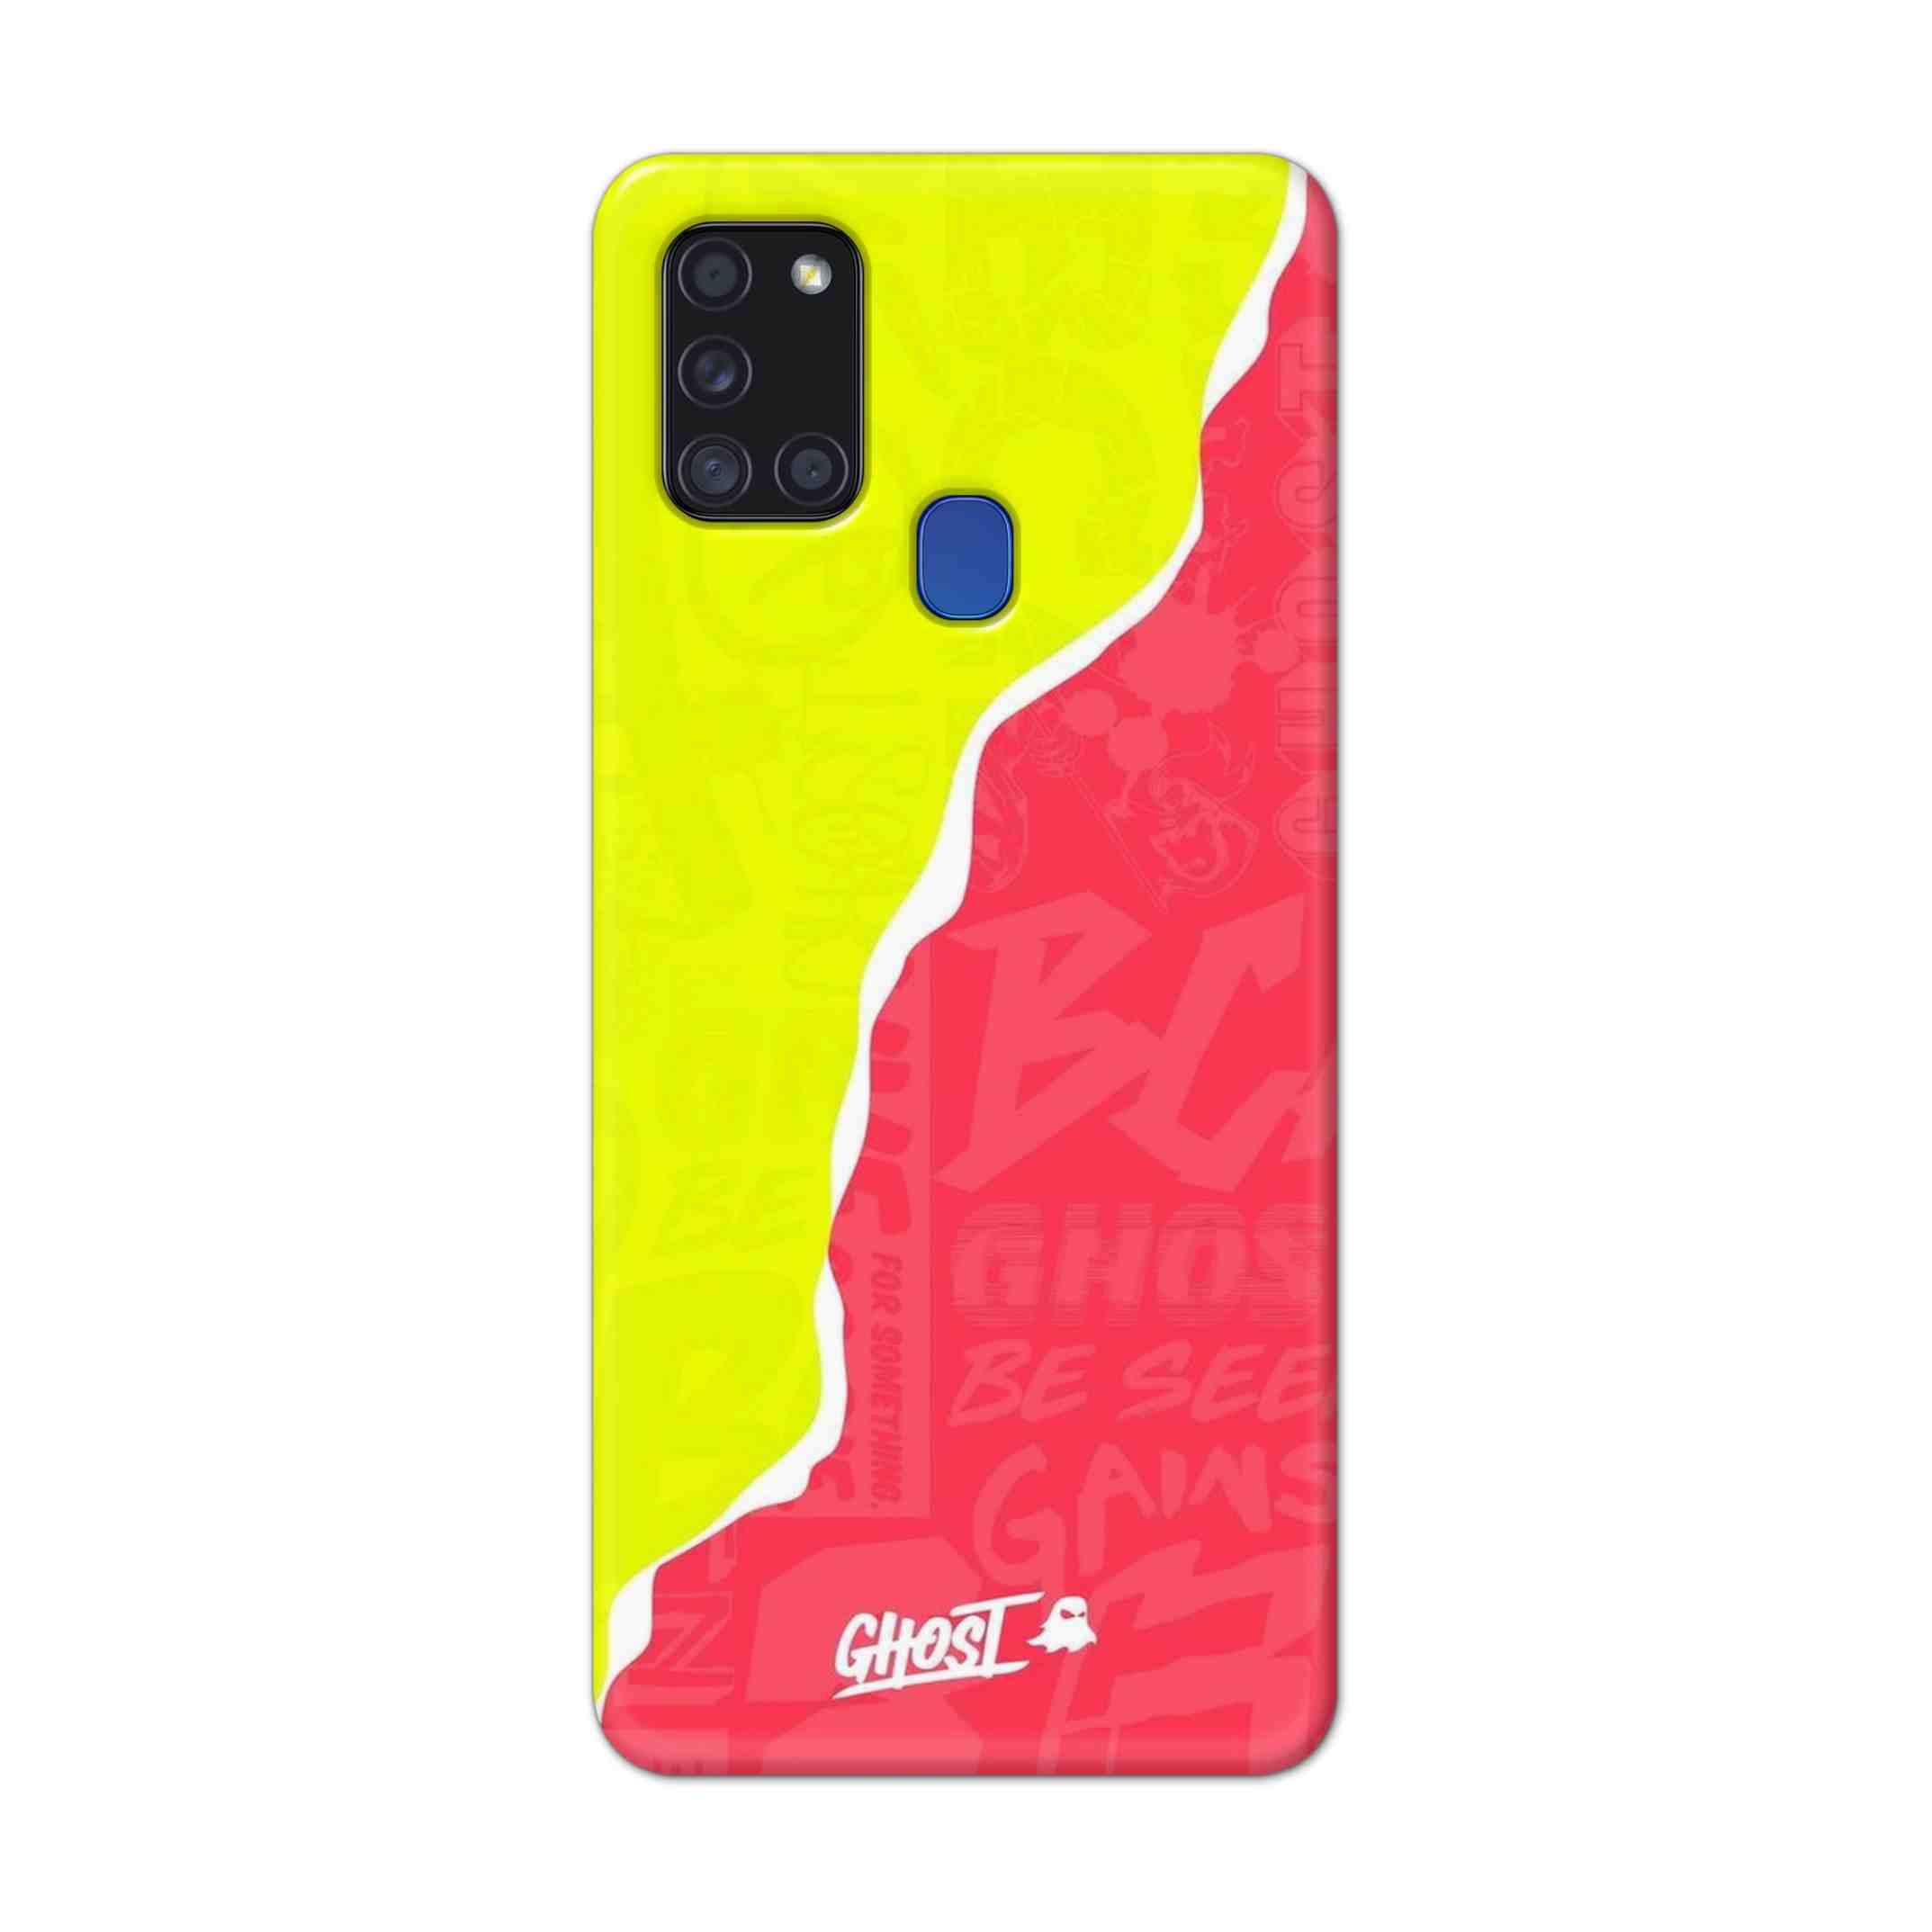 Buy Ghost Hard Back Mobile Phone Case Cover For Samsung Galaxy A21s Online